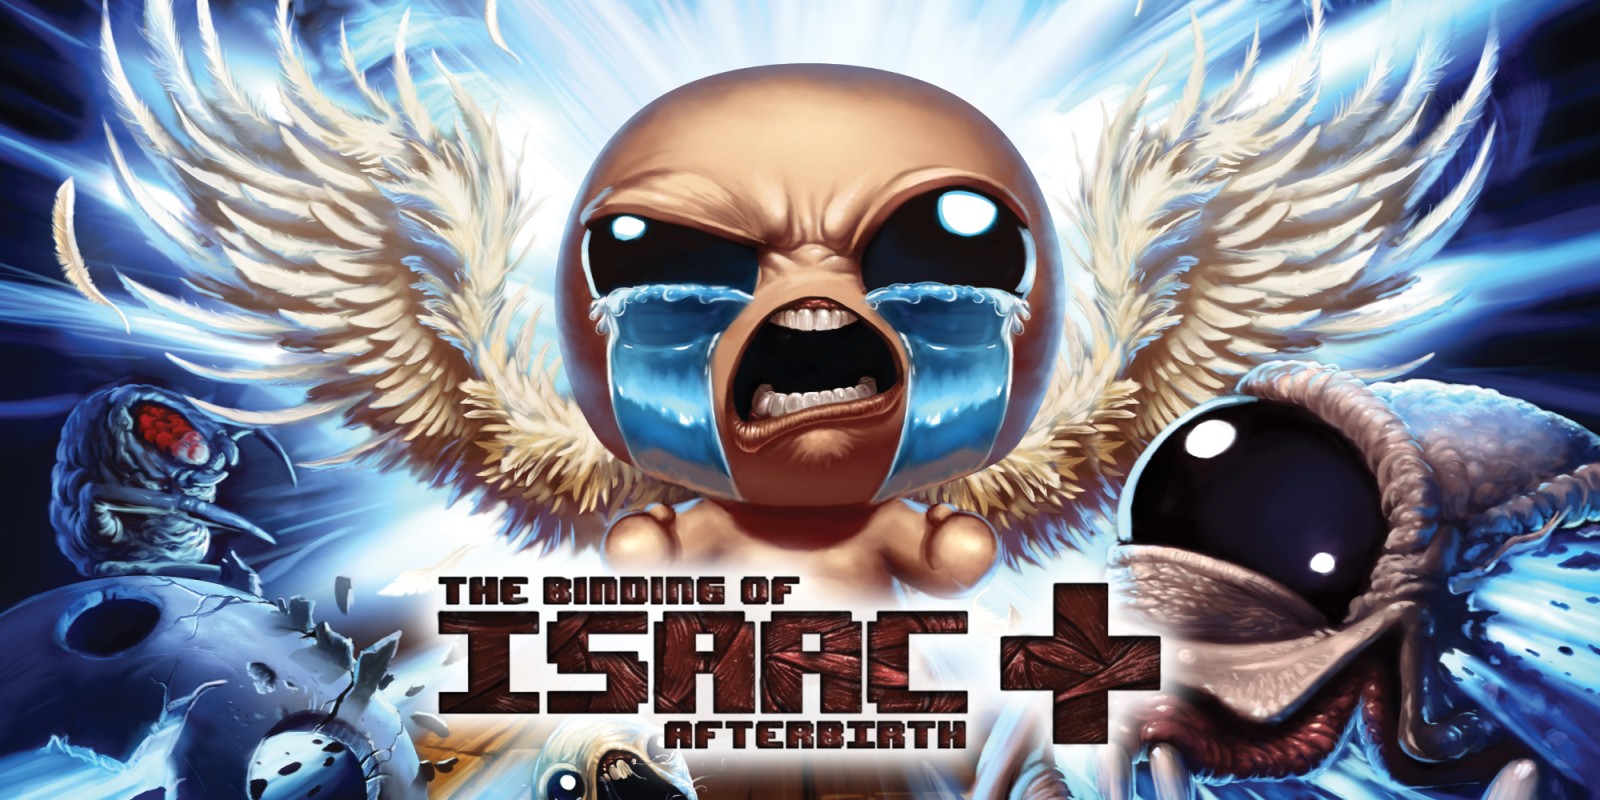 the binding of isaac afterbirth download free